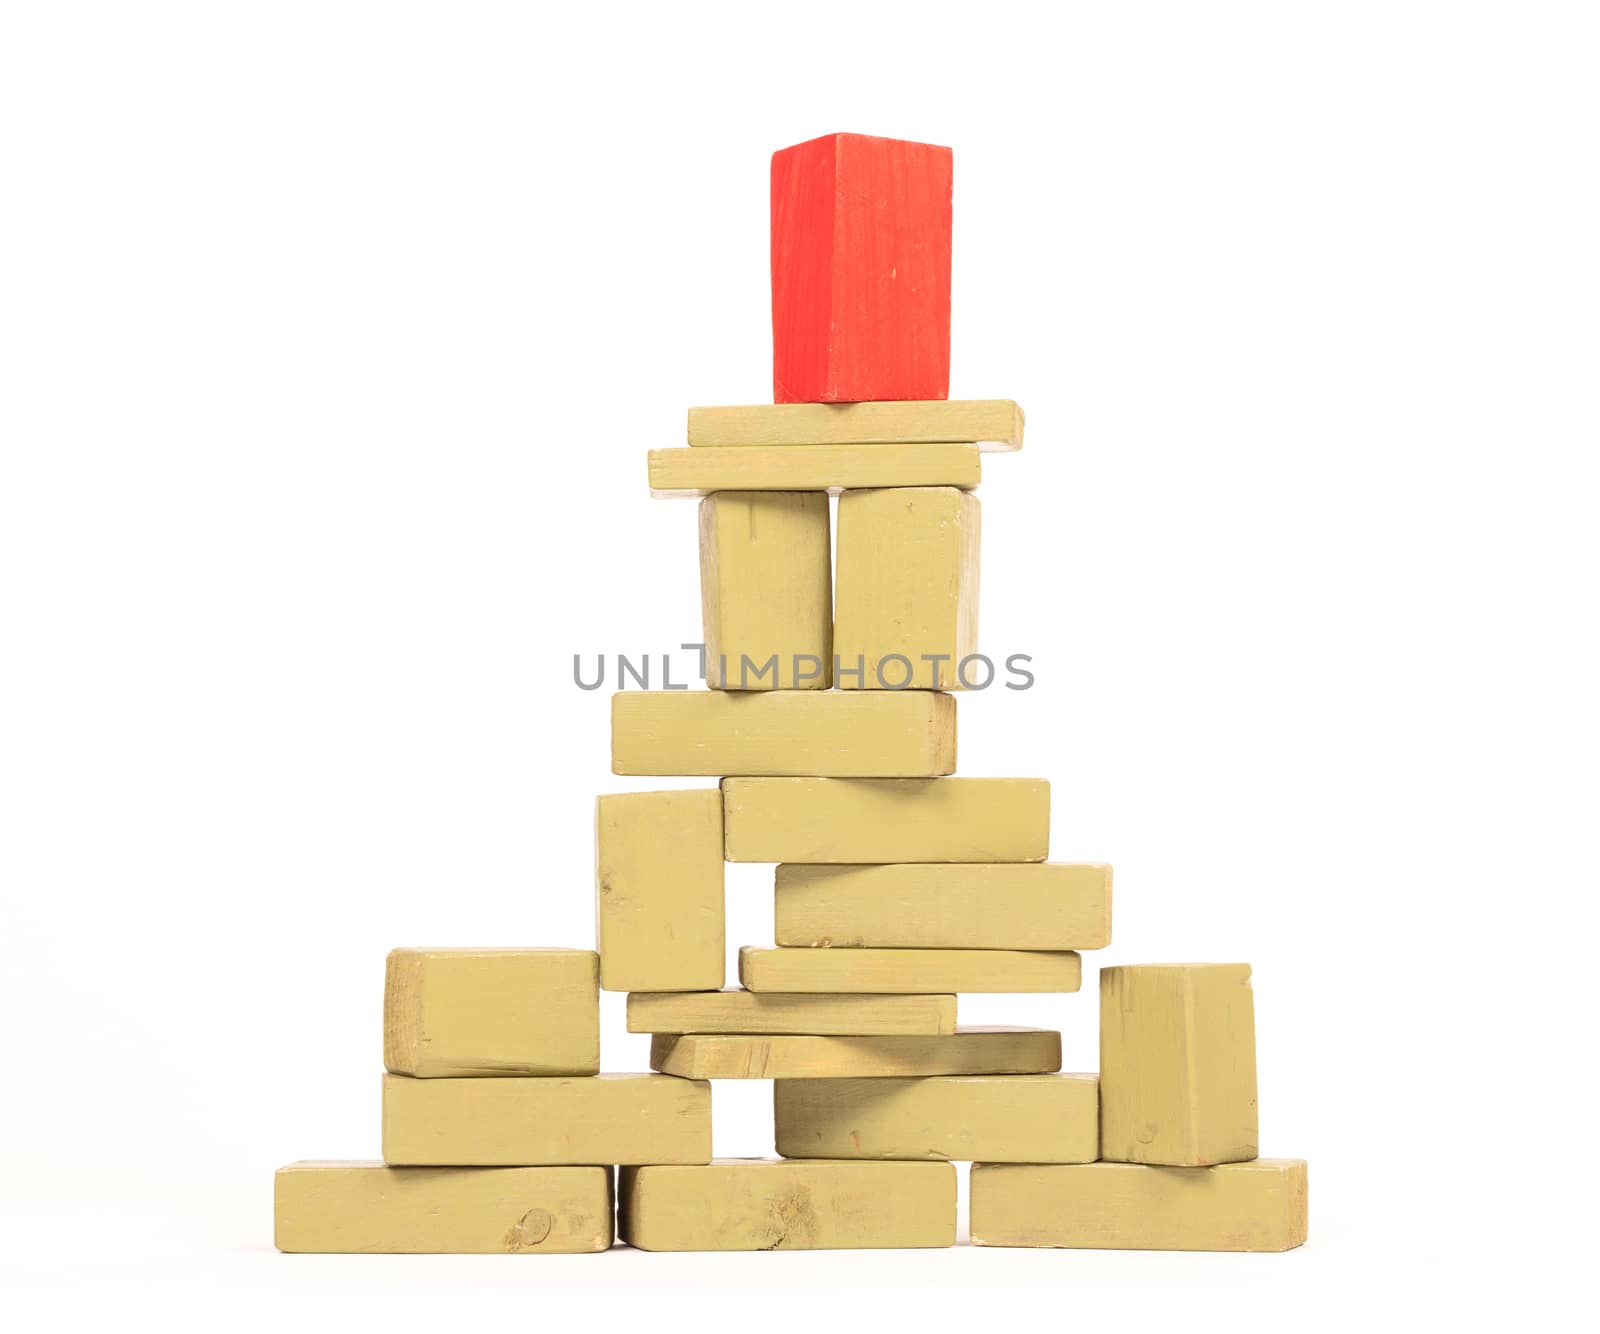 Vintage green building blocks isolated on white background, one standing out